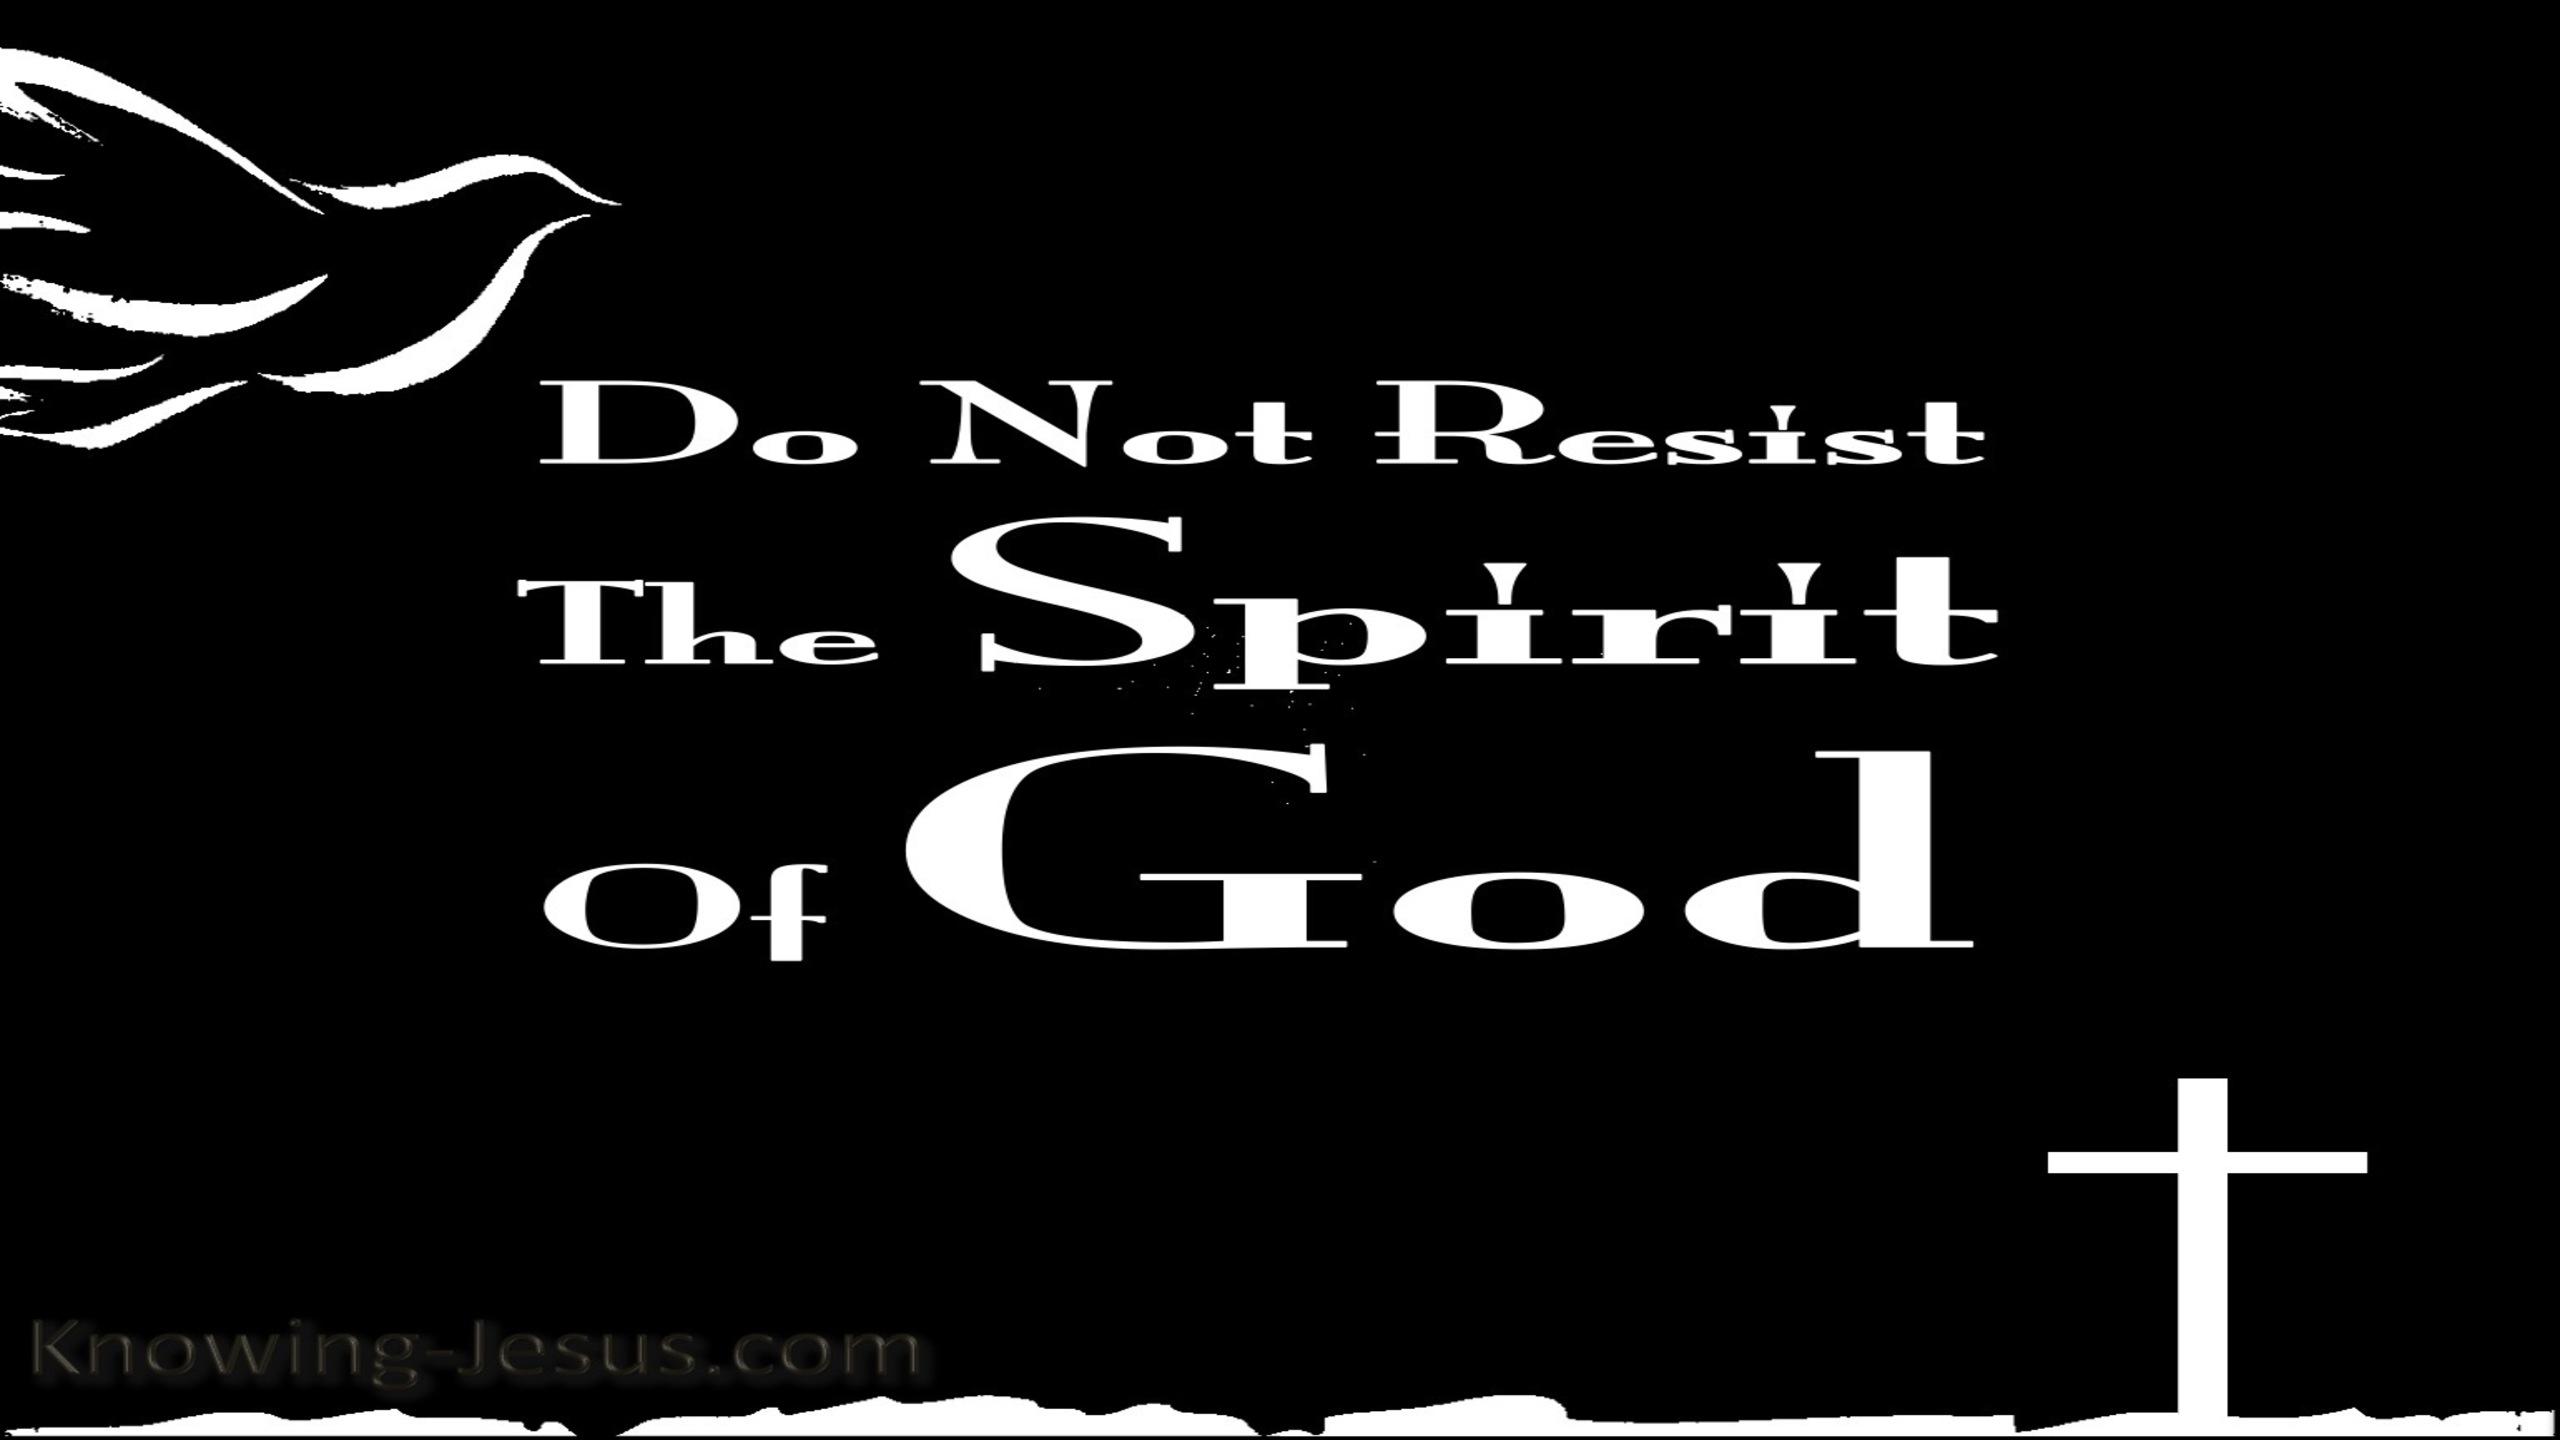 Acts 7:51 You Resist The Spirit (white)